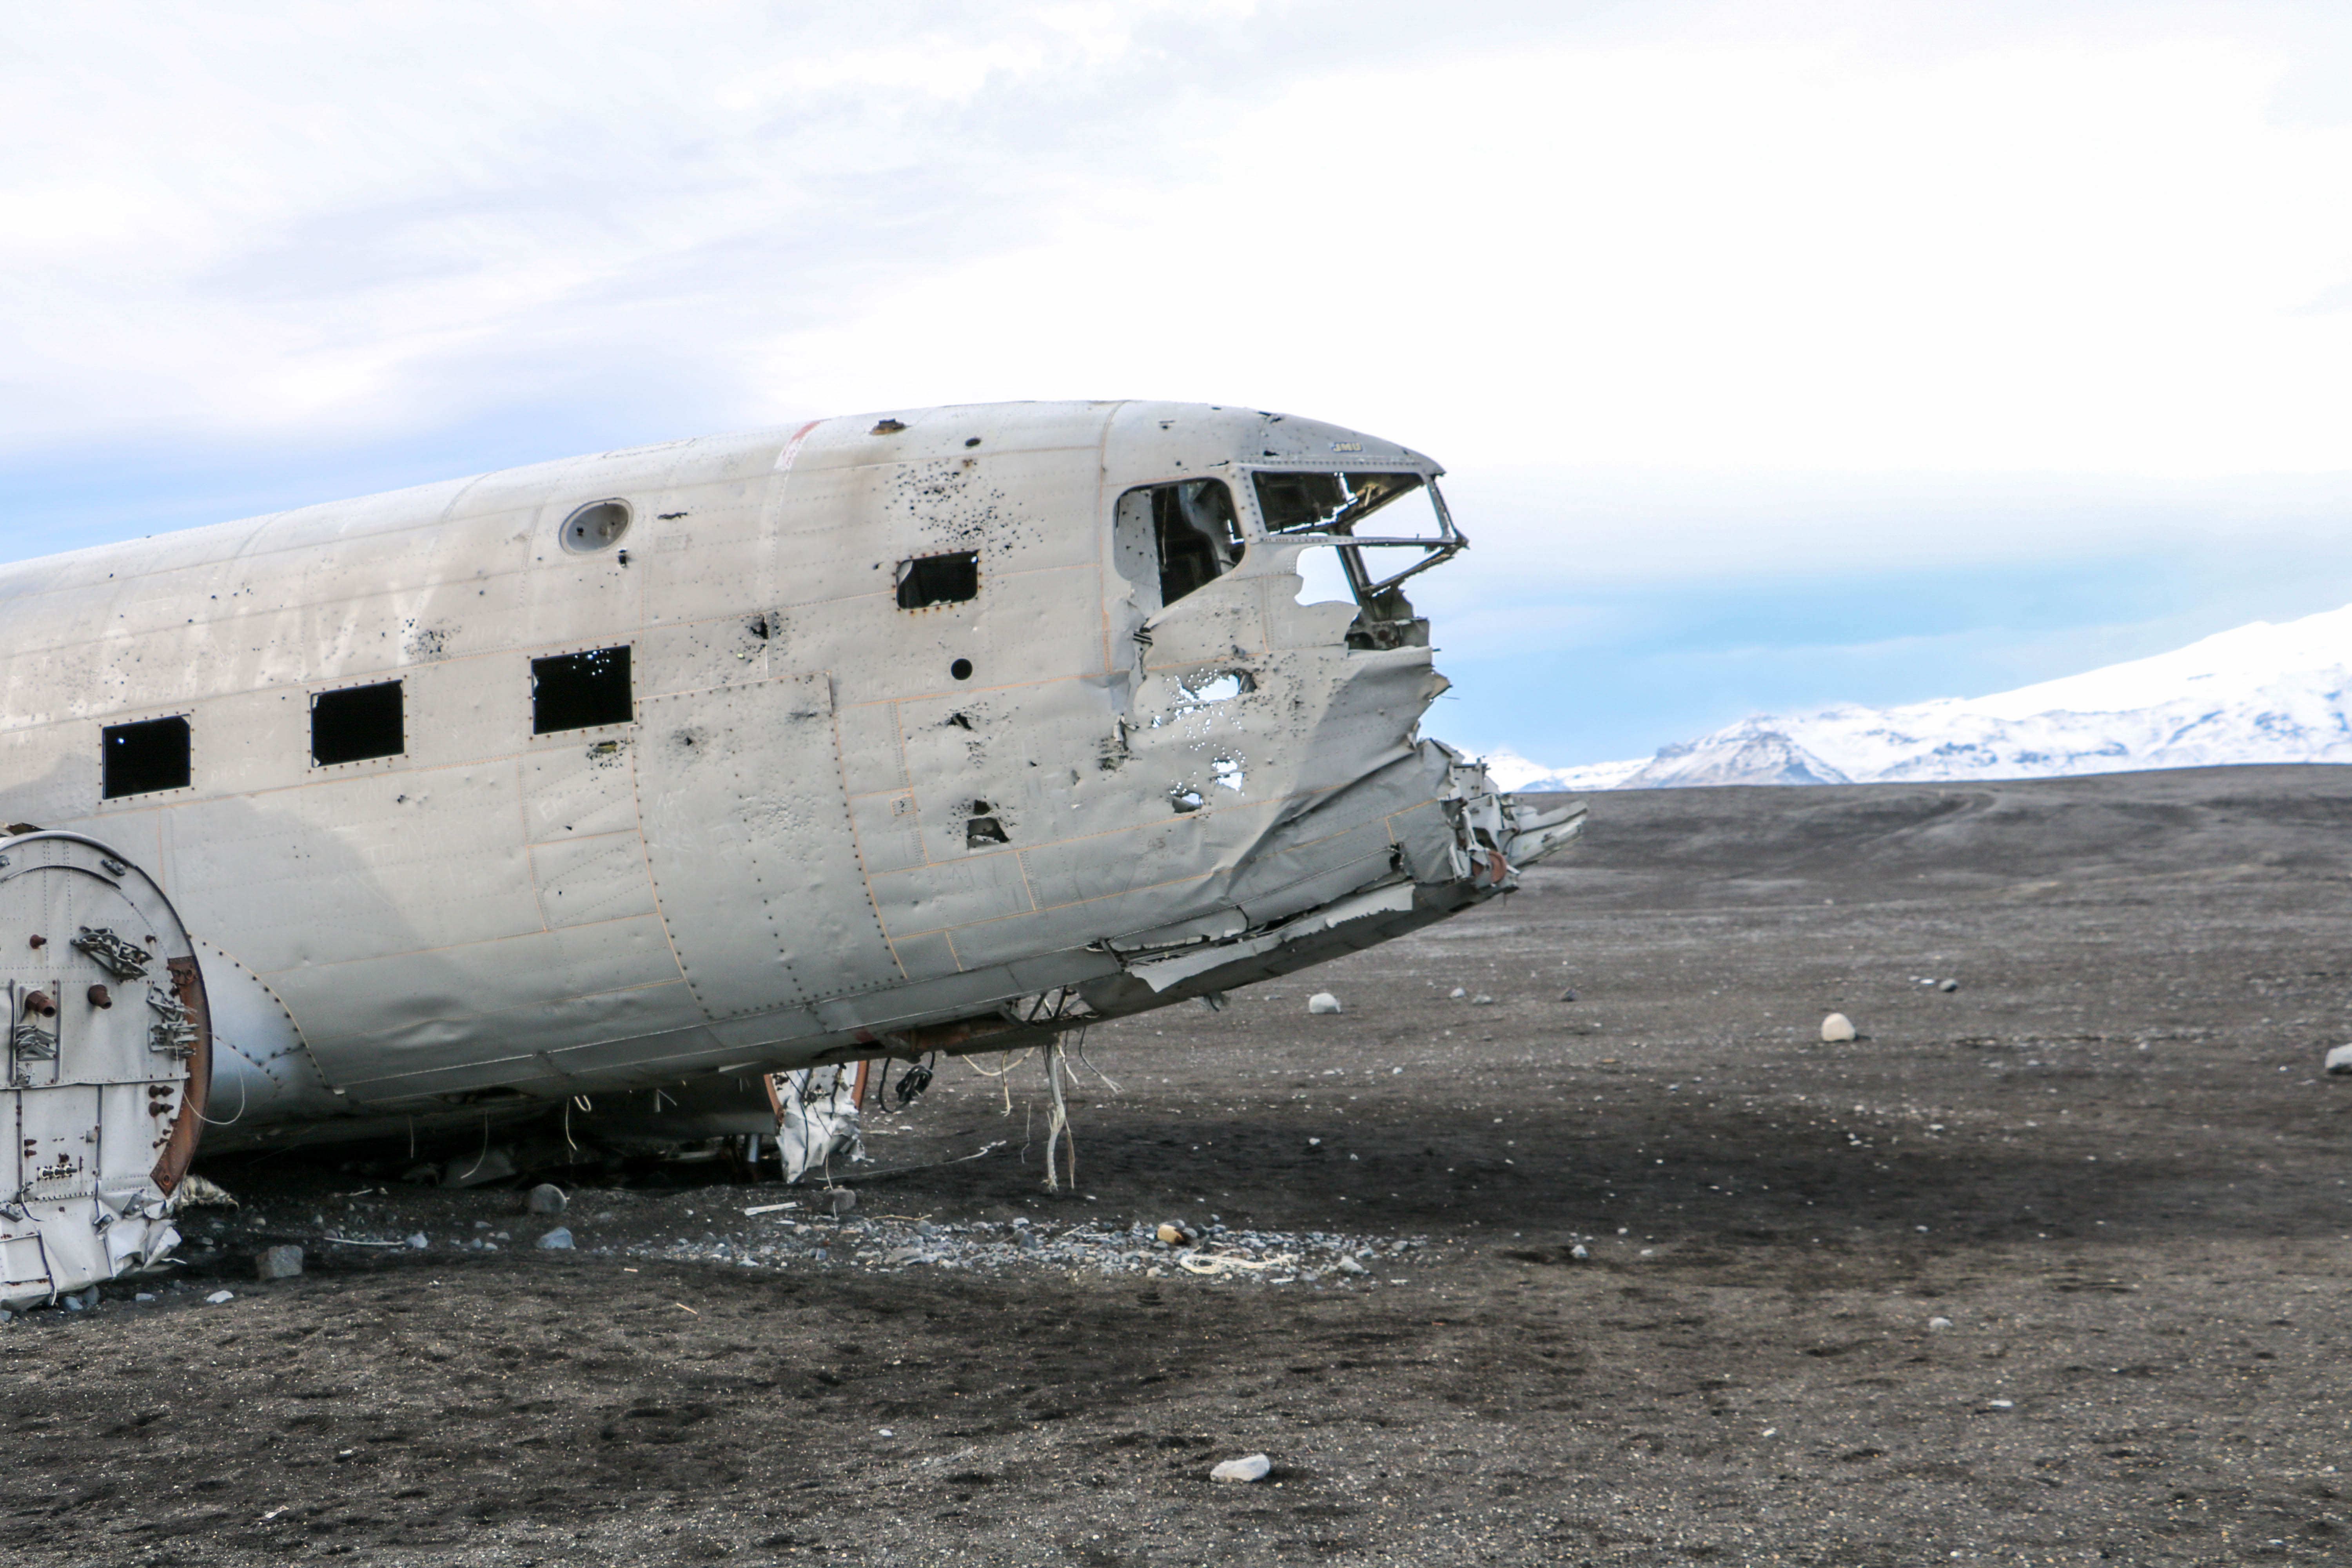 You are able to walk around and in the plane wreck on Solheimasandur black sand beach in South Iceland | Life With a View